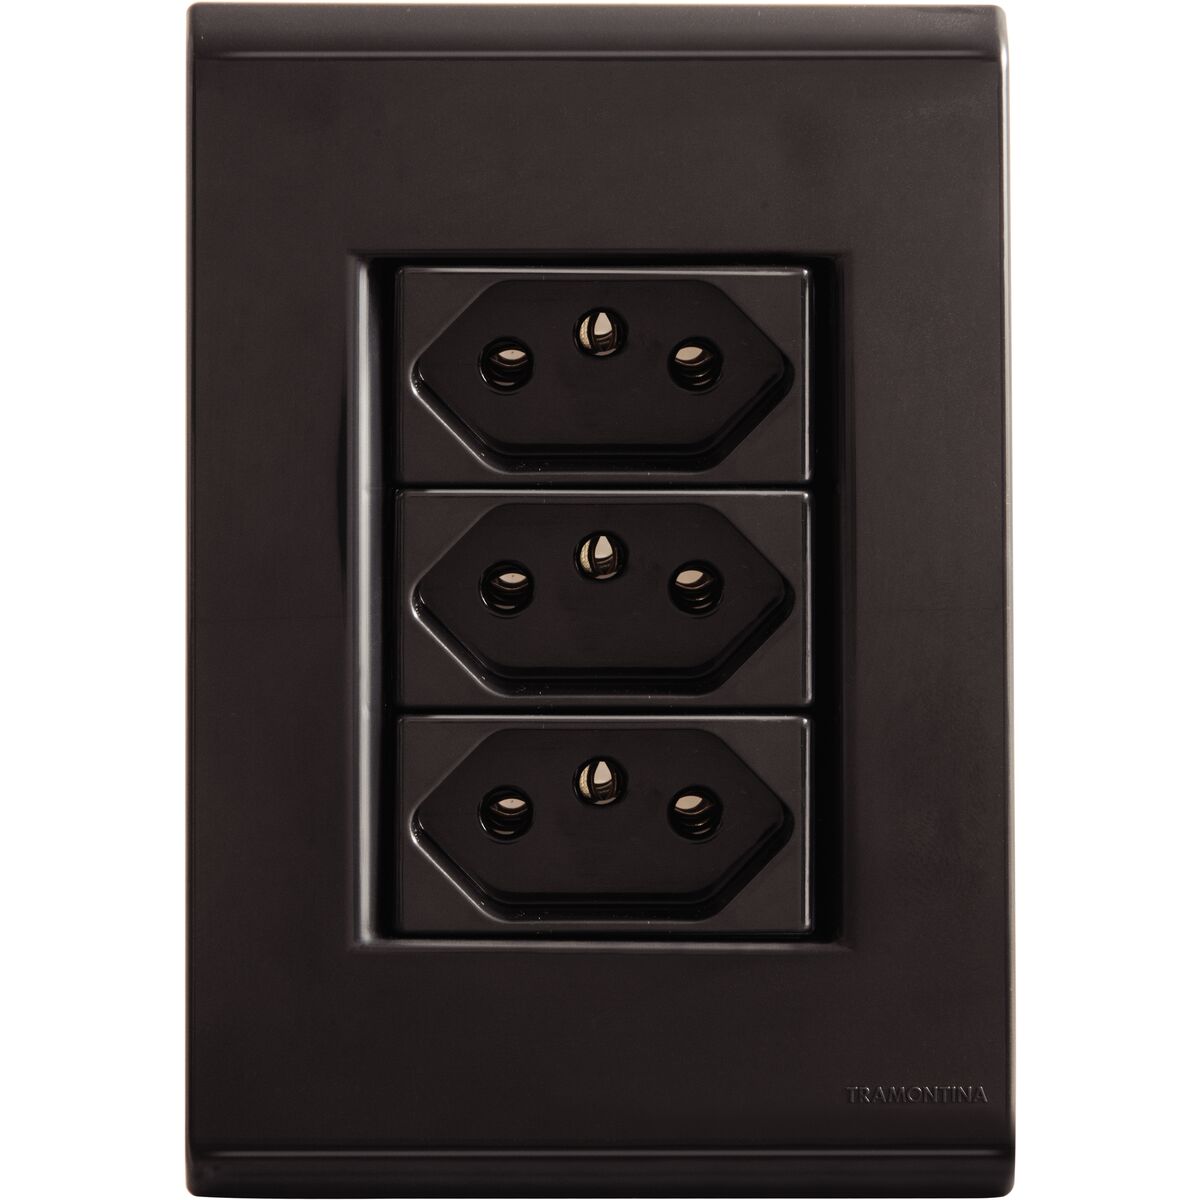 
Tramontina Liz Graphite-Colored 4x2 Set with 3 2P+E Outlets, 10 A, 250 V
